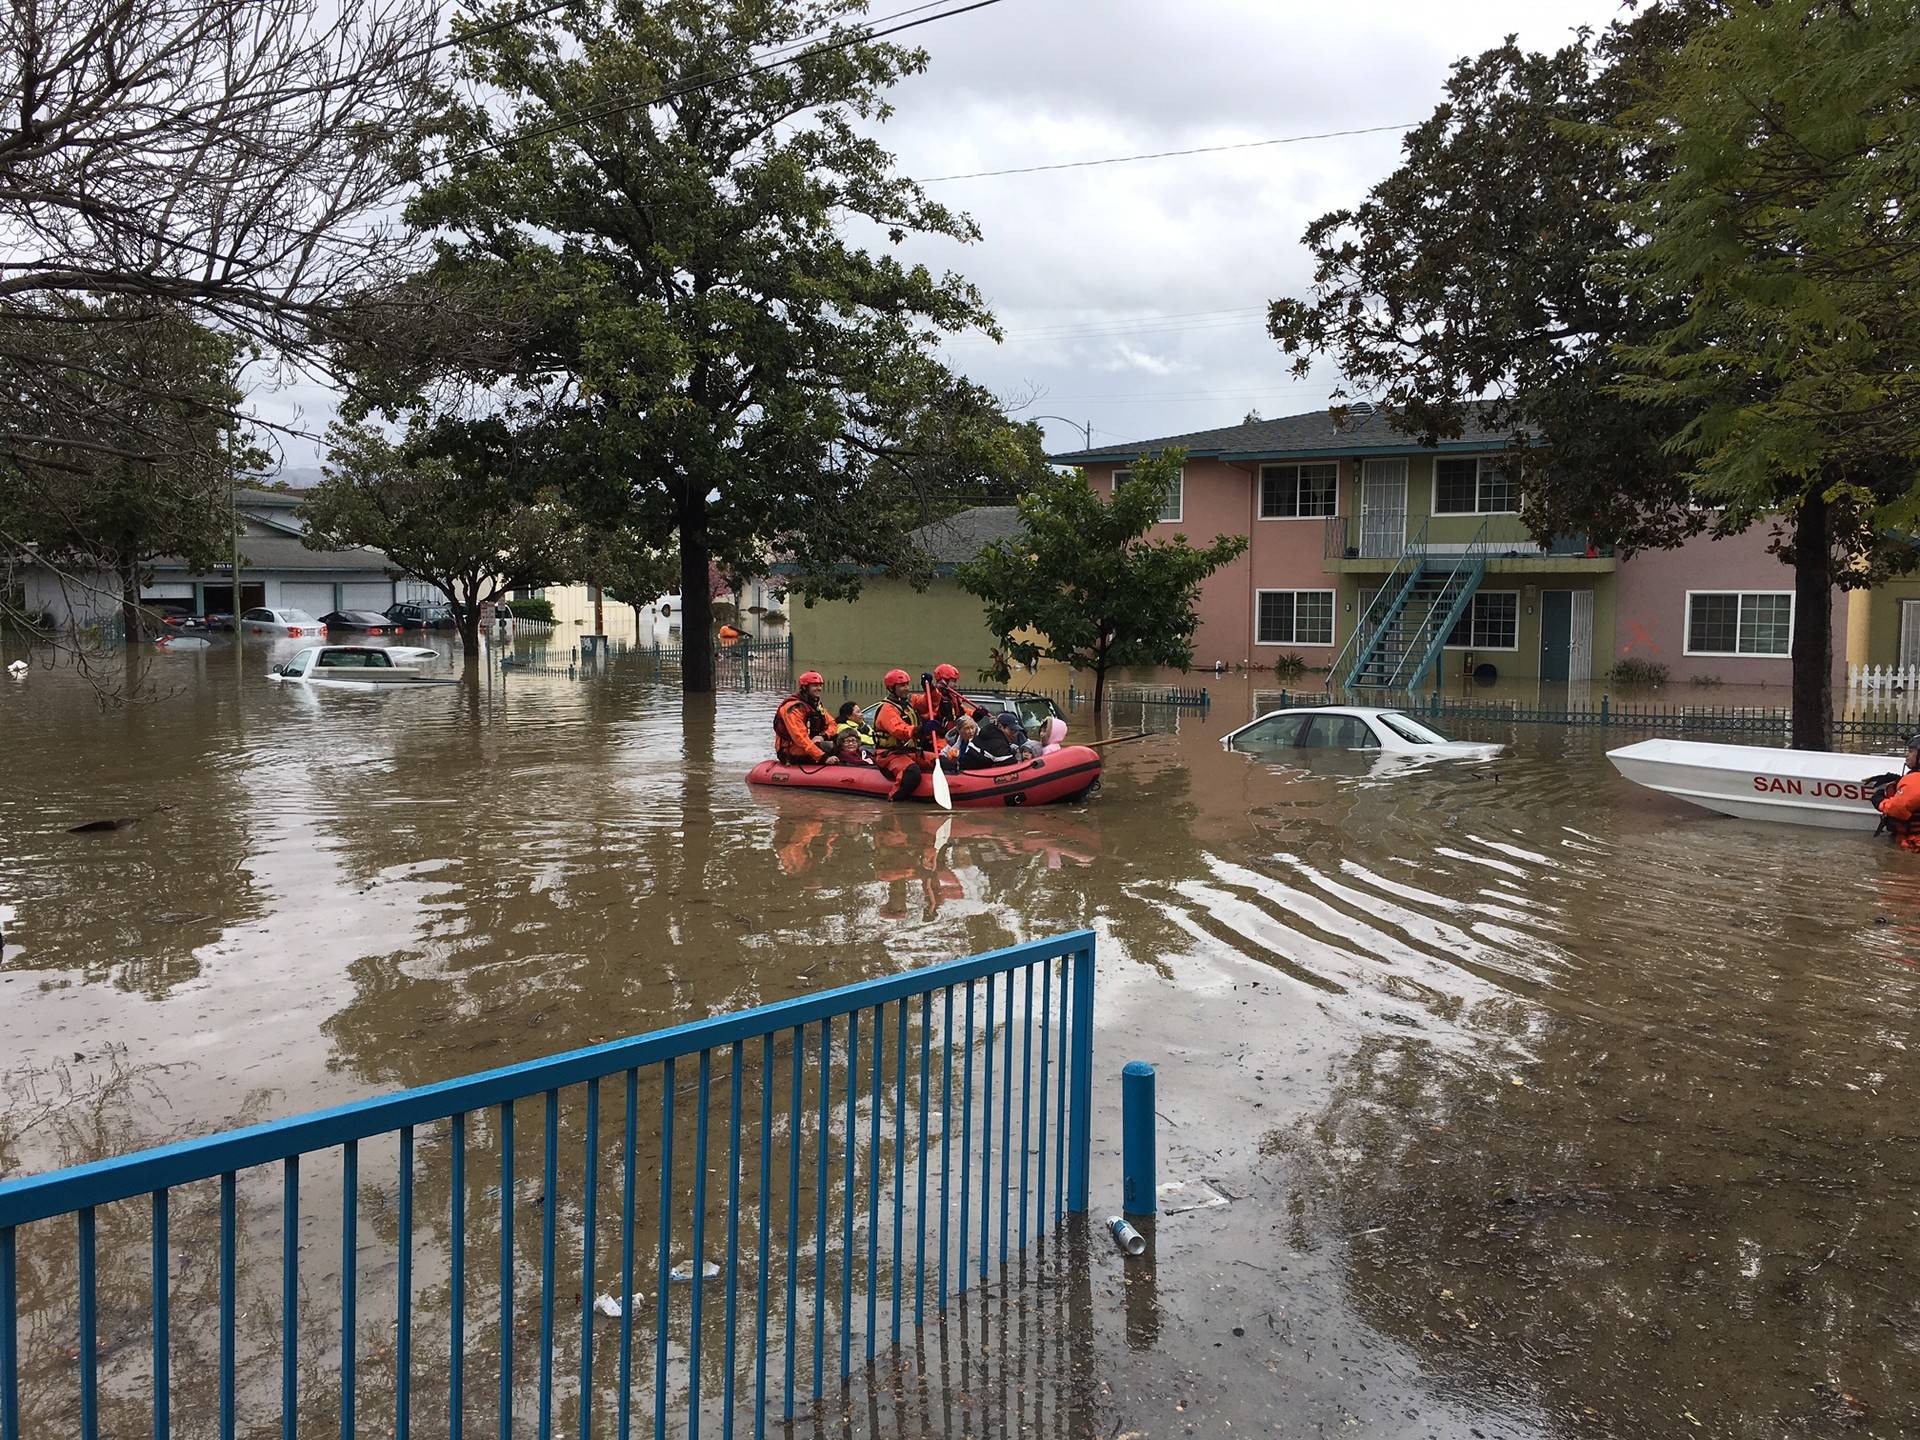 San Jose Fire Department plows through floodwaters on Feb. 21, 2017, looking for people to help after torrential rains triggered flooding. Peter Jon Shuler/KQED